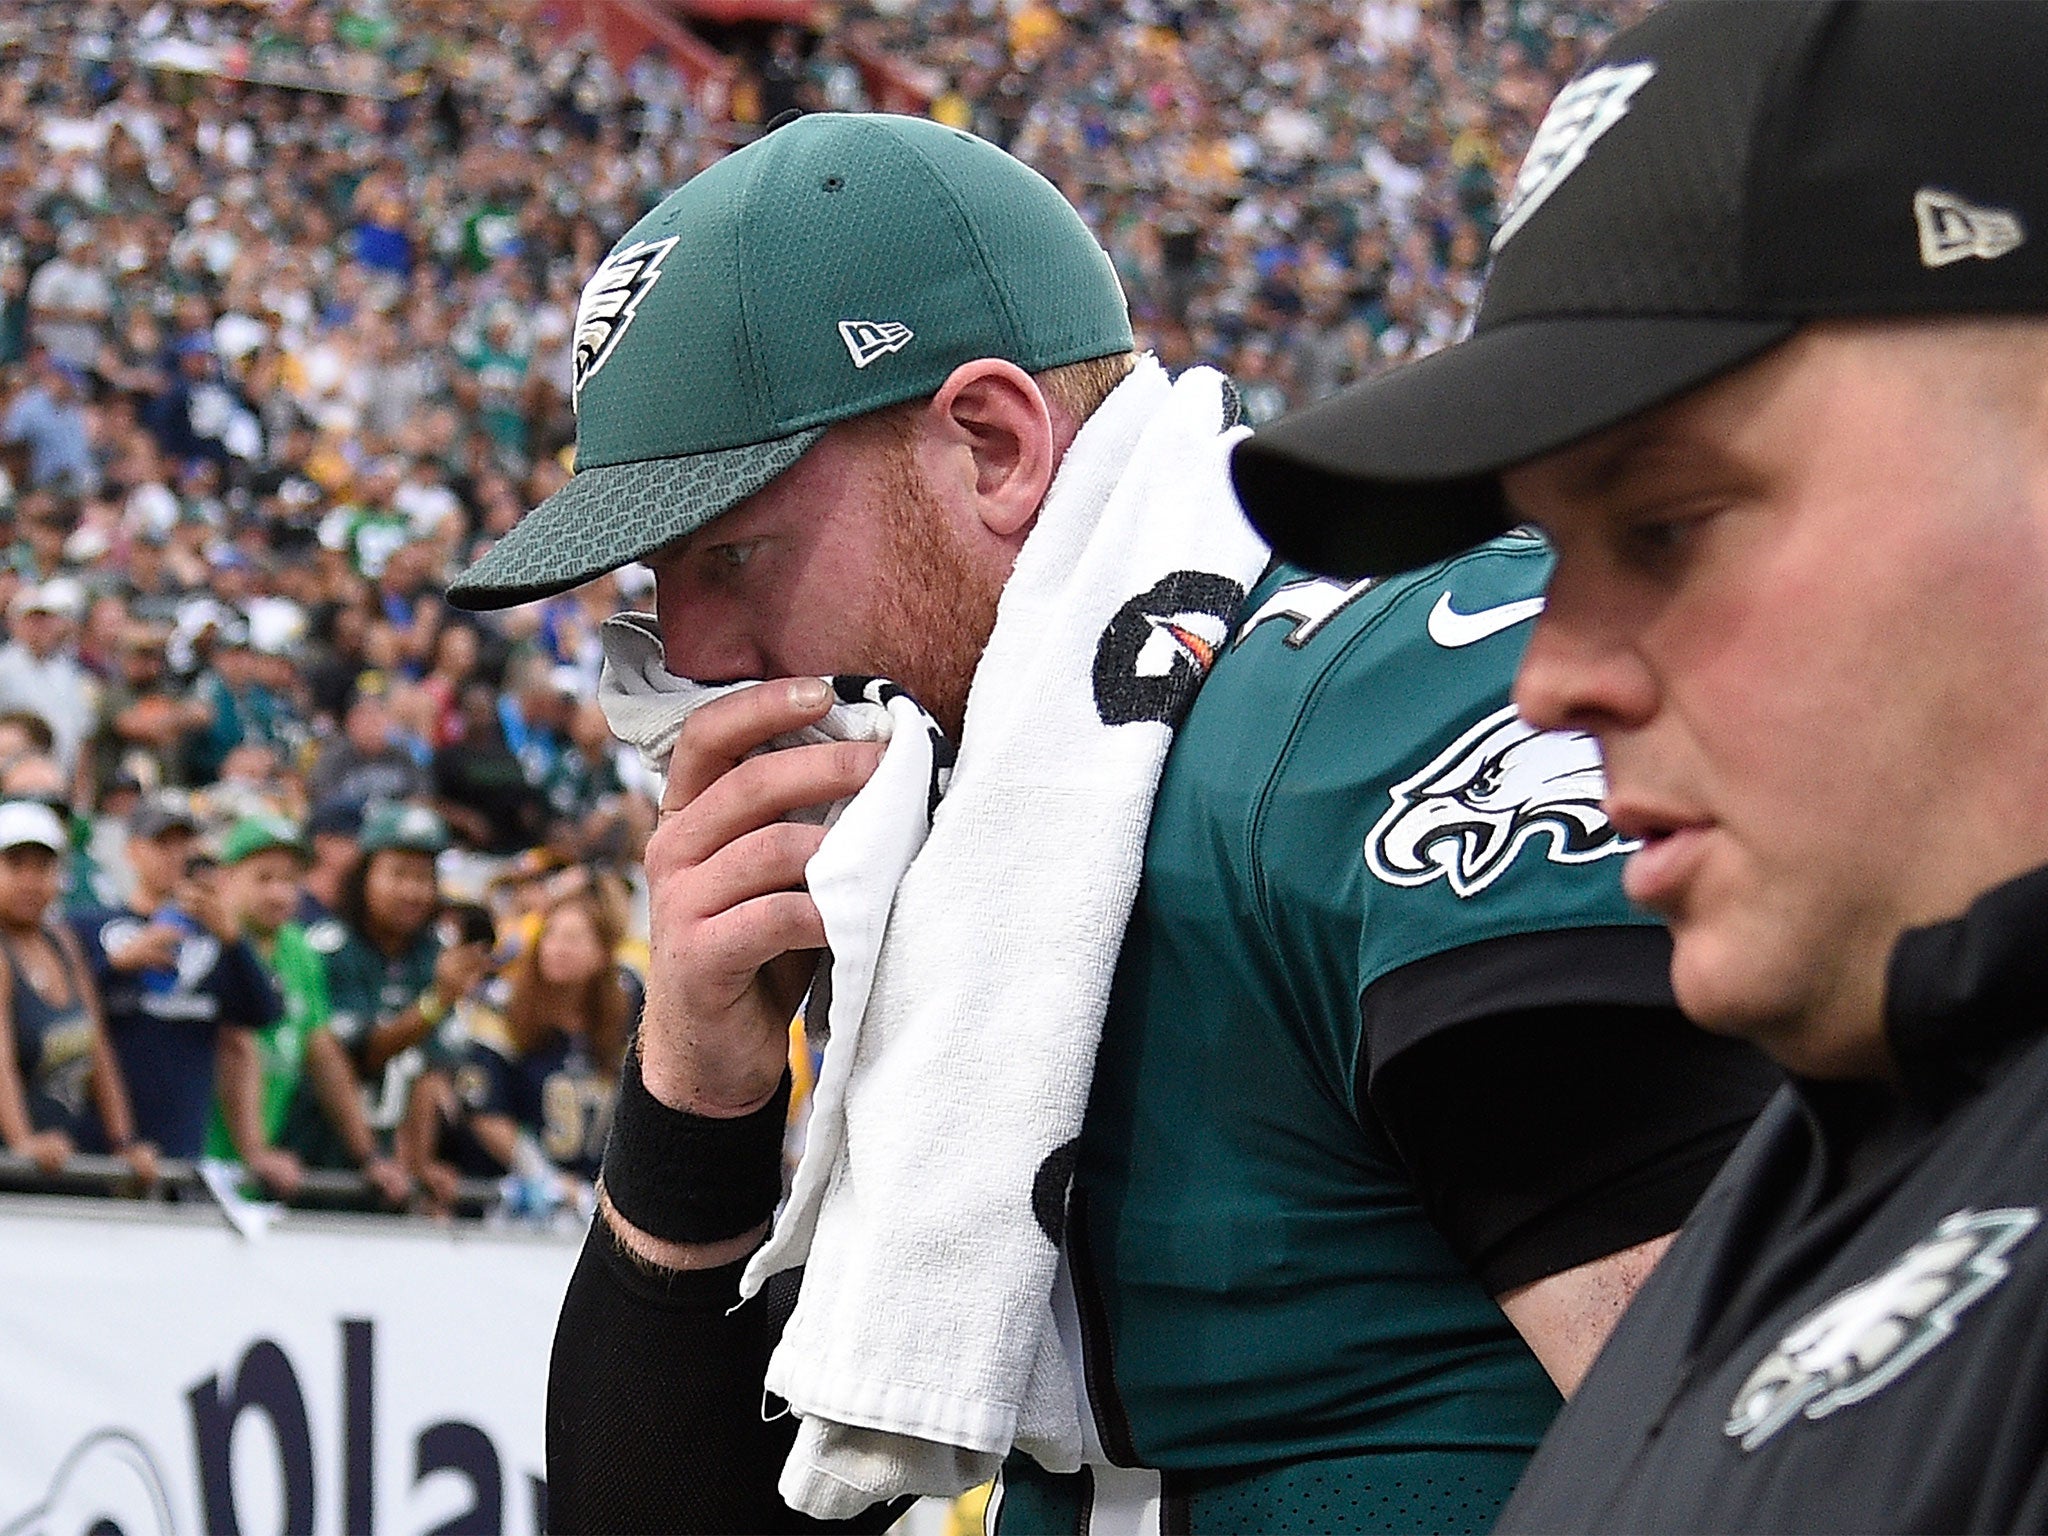 The Eagles' season suffered a huge blow when Carson Wentz ruptured his ACL